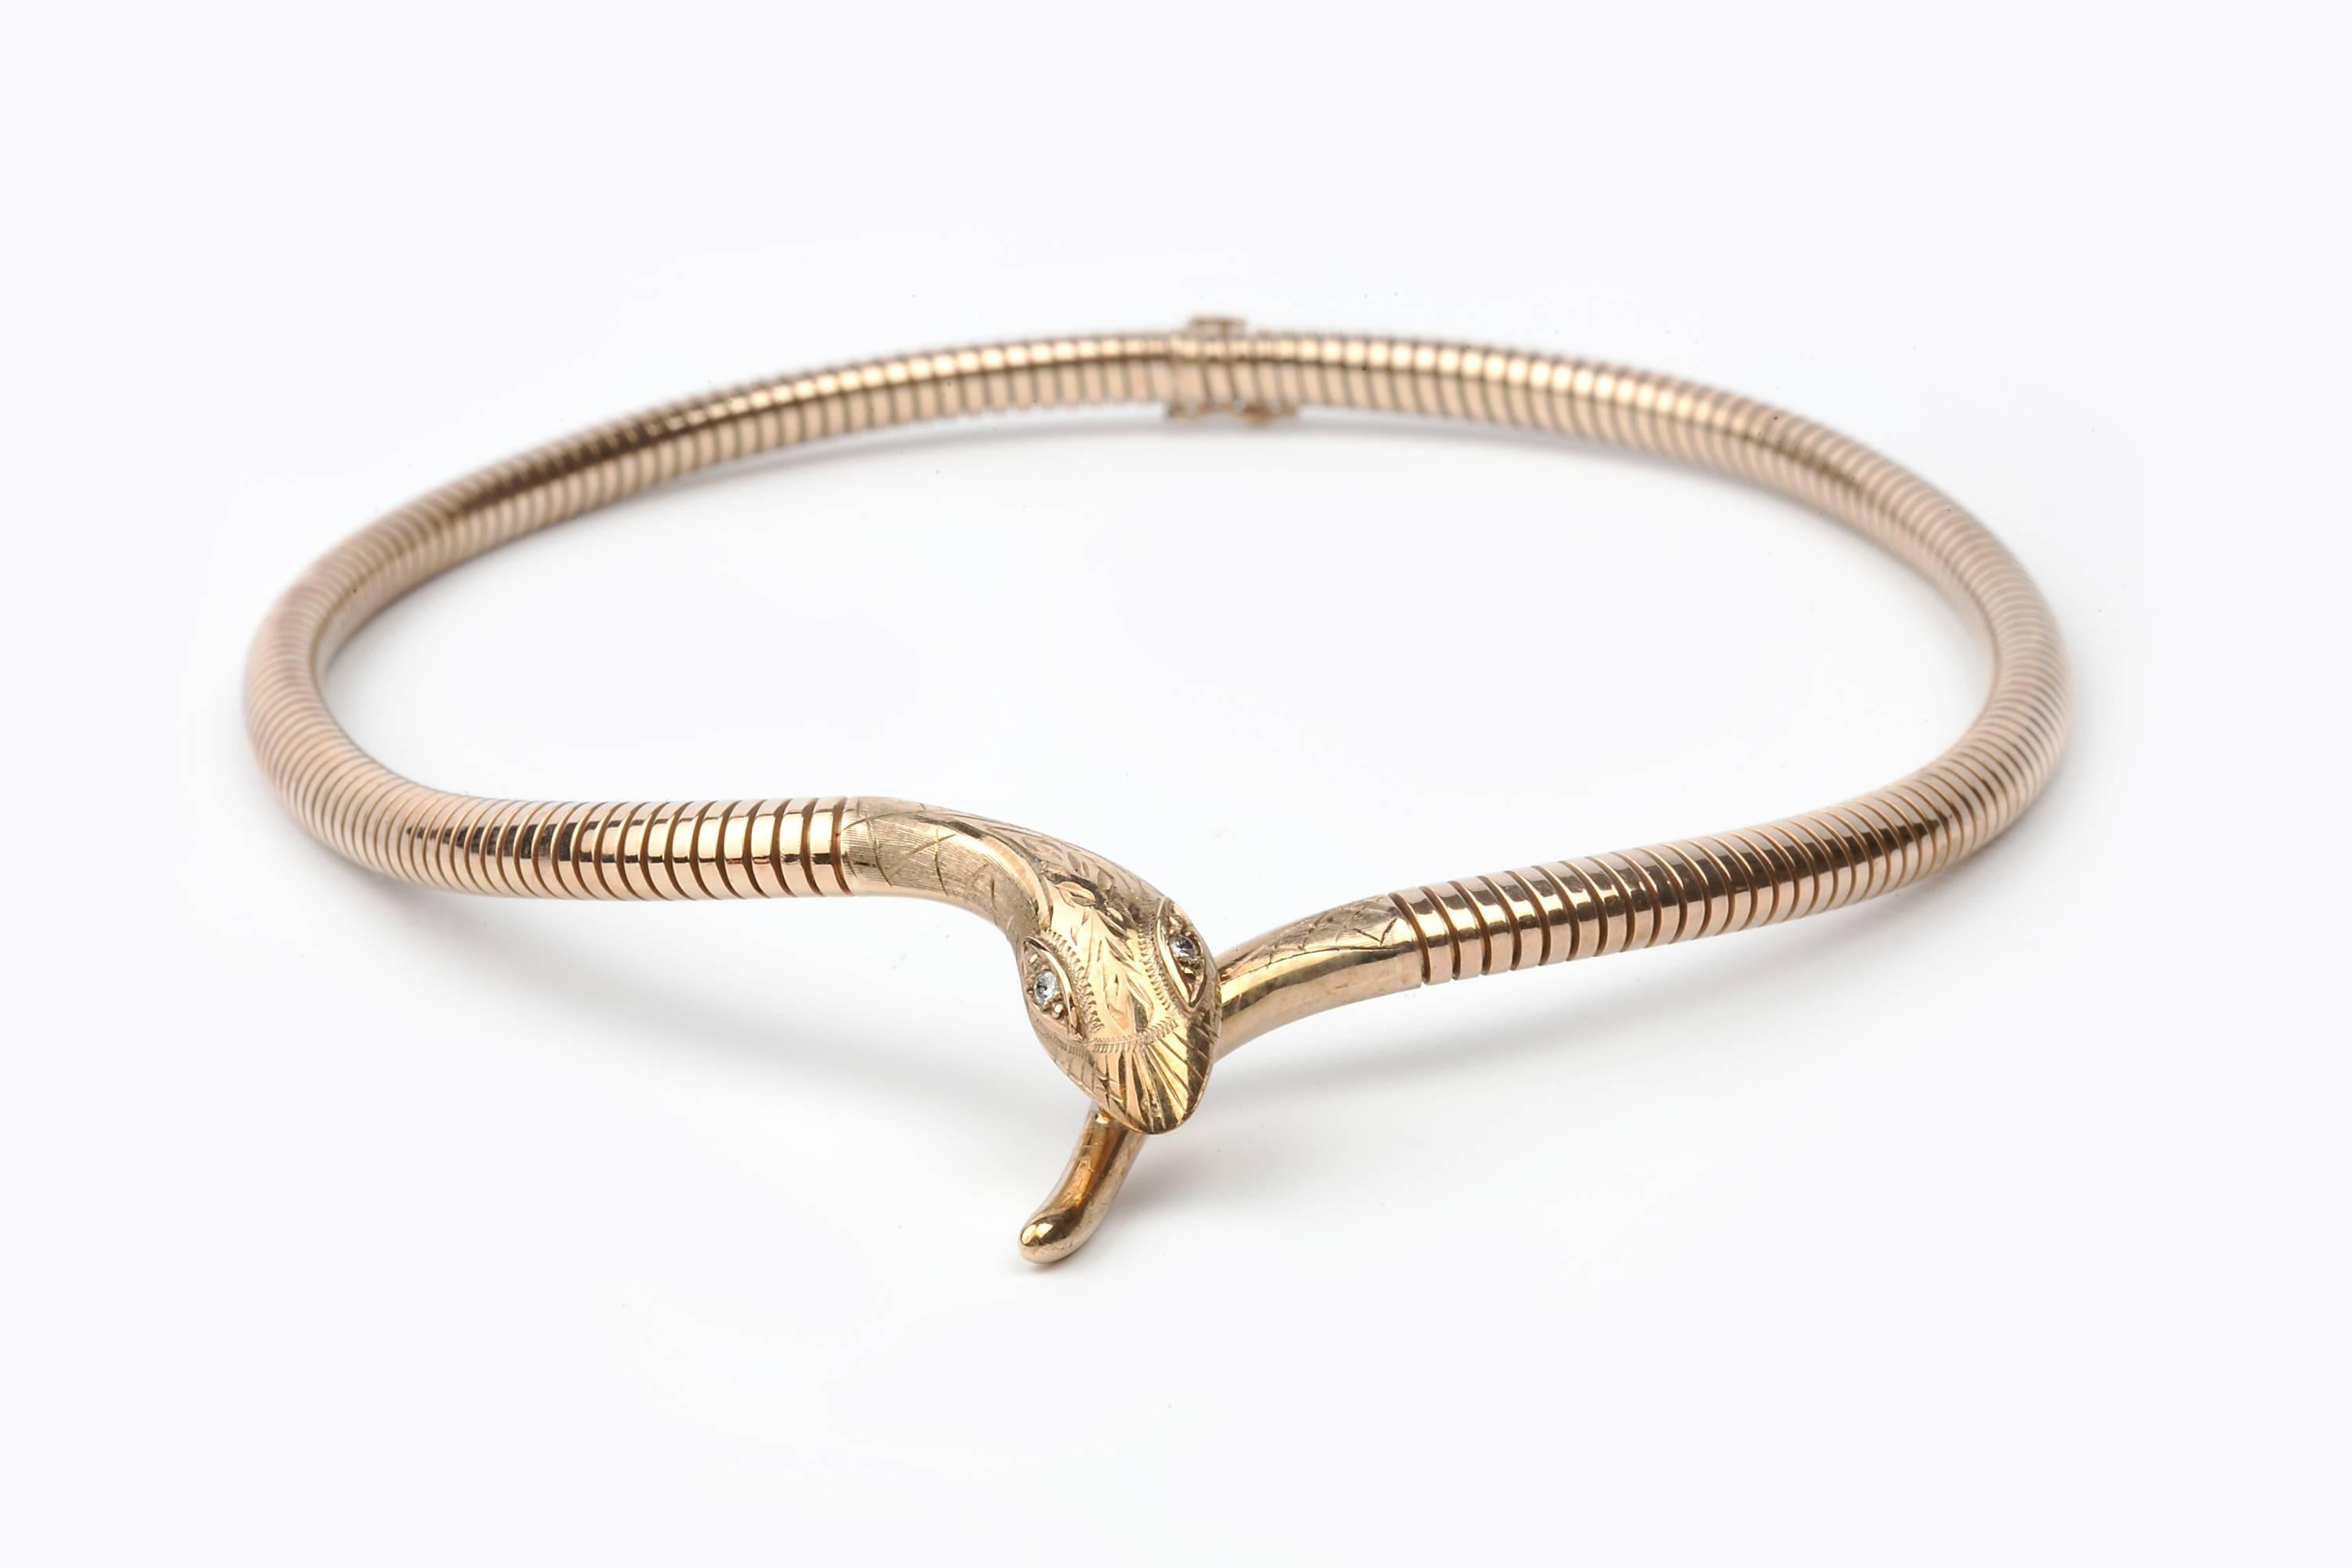 A Cropp and Farr 9K gold snake necklace from the 1980s, in beautiul condition, set with diamond eyes, about 0.10cts in total. The necklace sits well in the hollow of the neck.